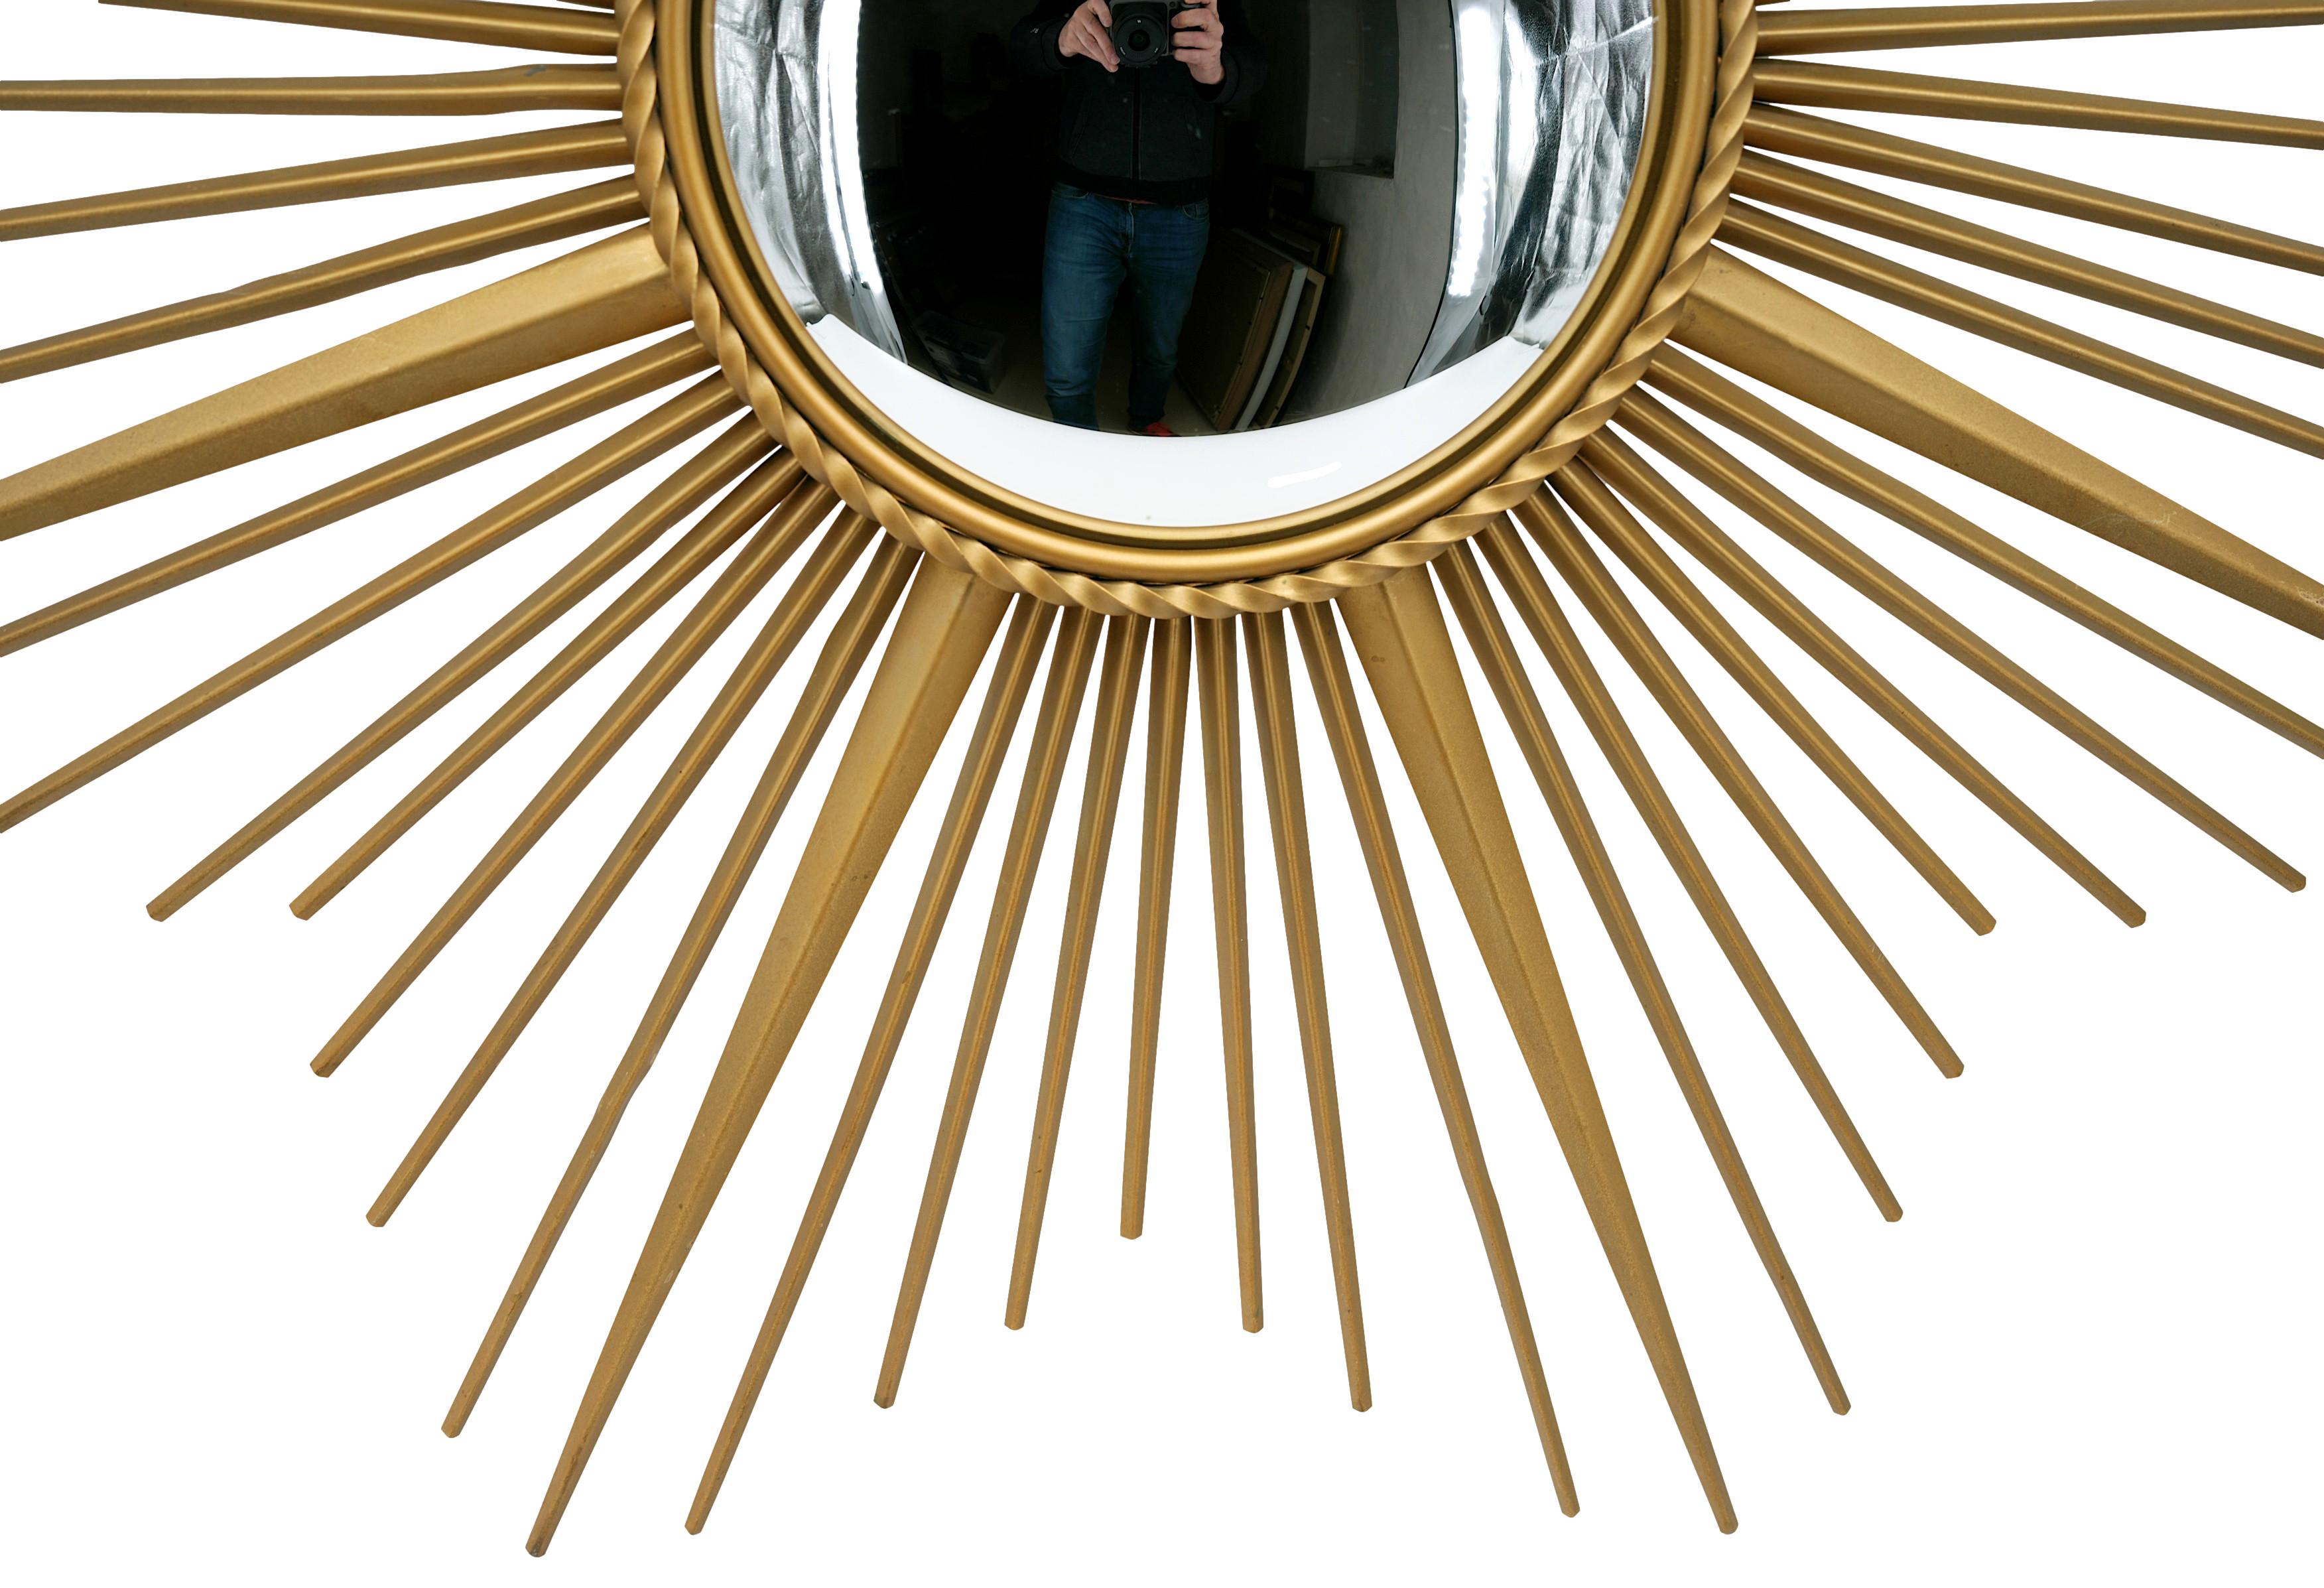 Large sun wall mirror by CHATY Vallauris, Alpes-Maritimes, France, 1950s. Patinated gold. Diameter : 35.4